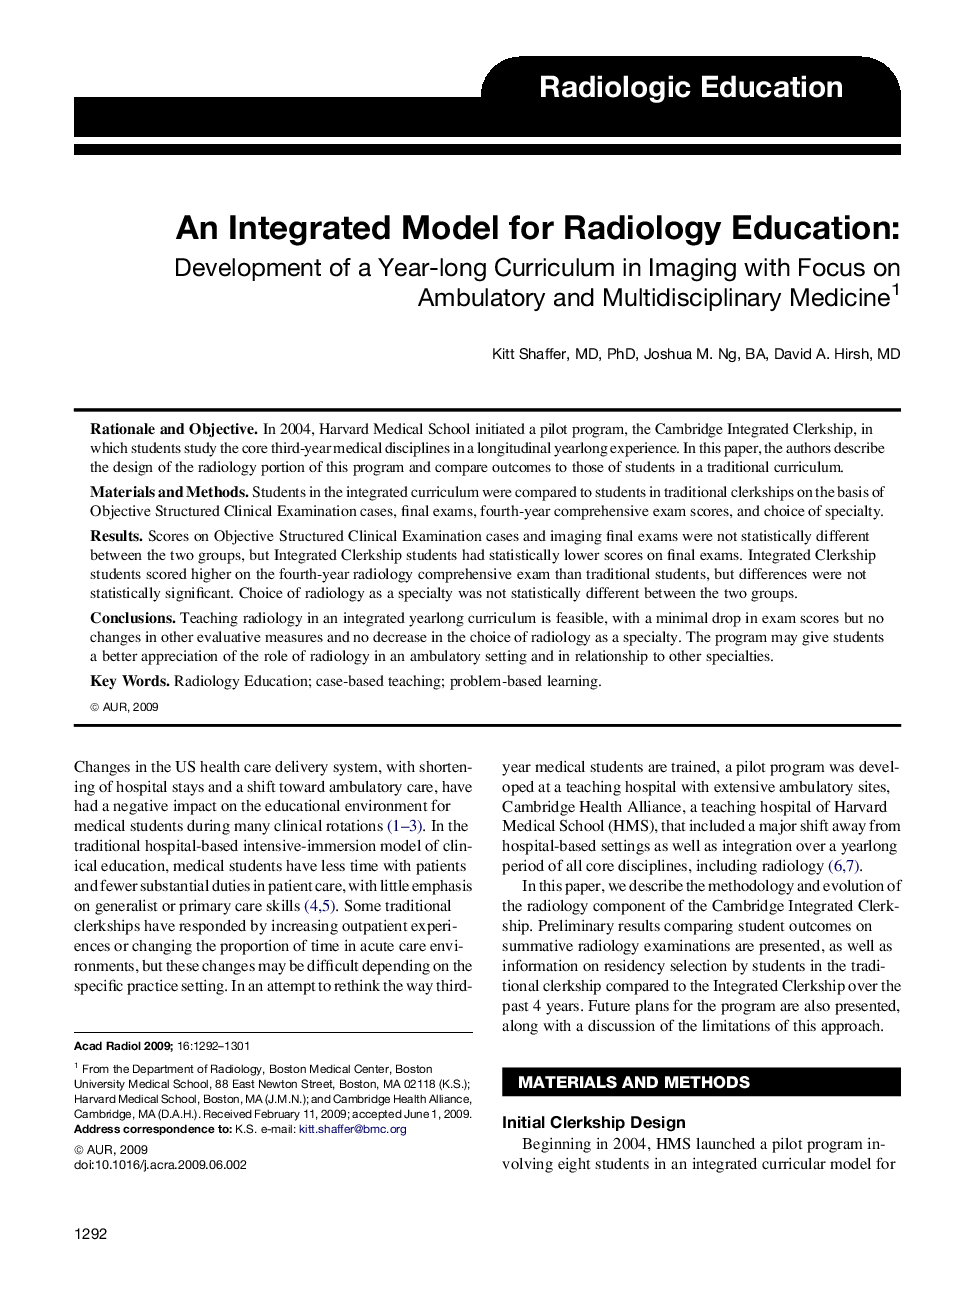 An Integrated Model for Radiology Education